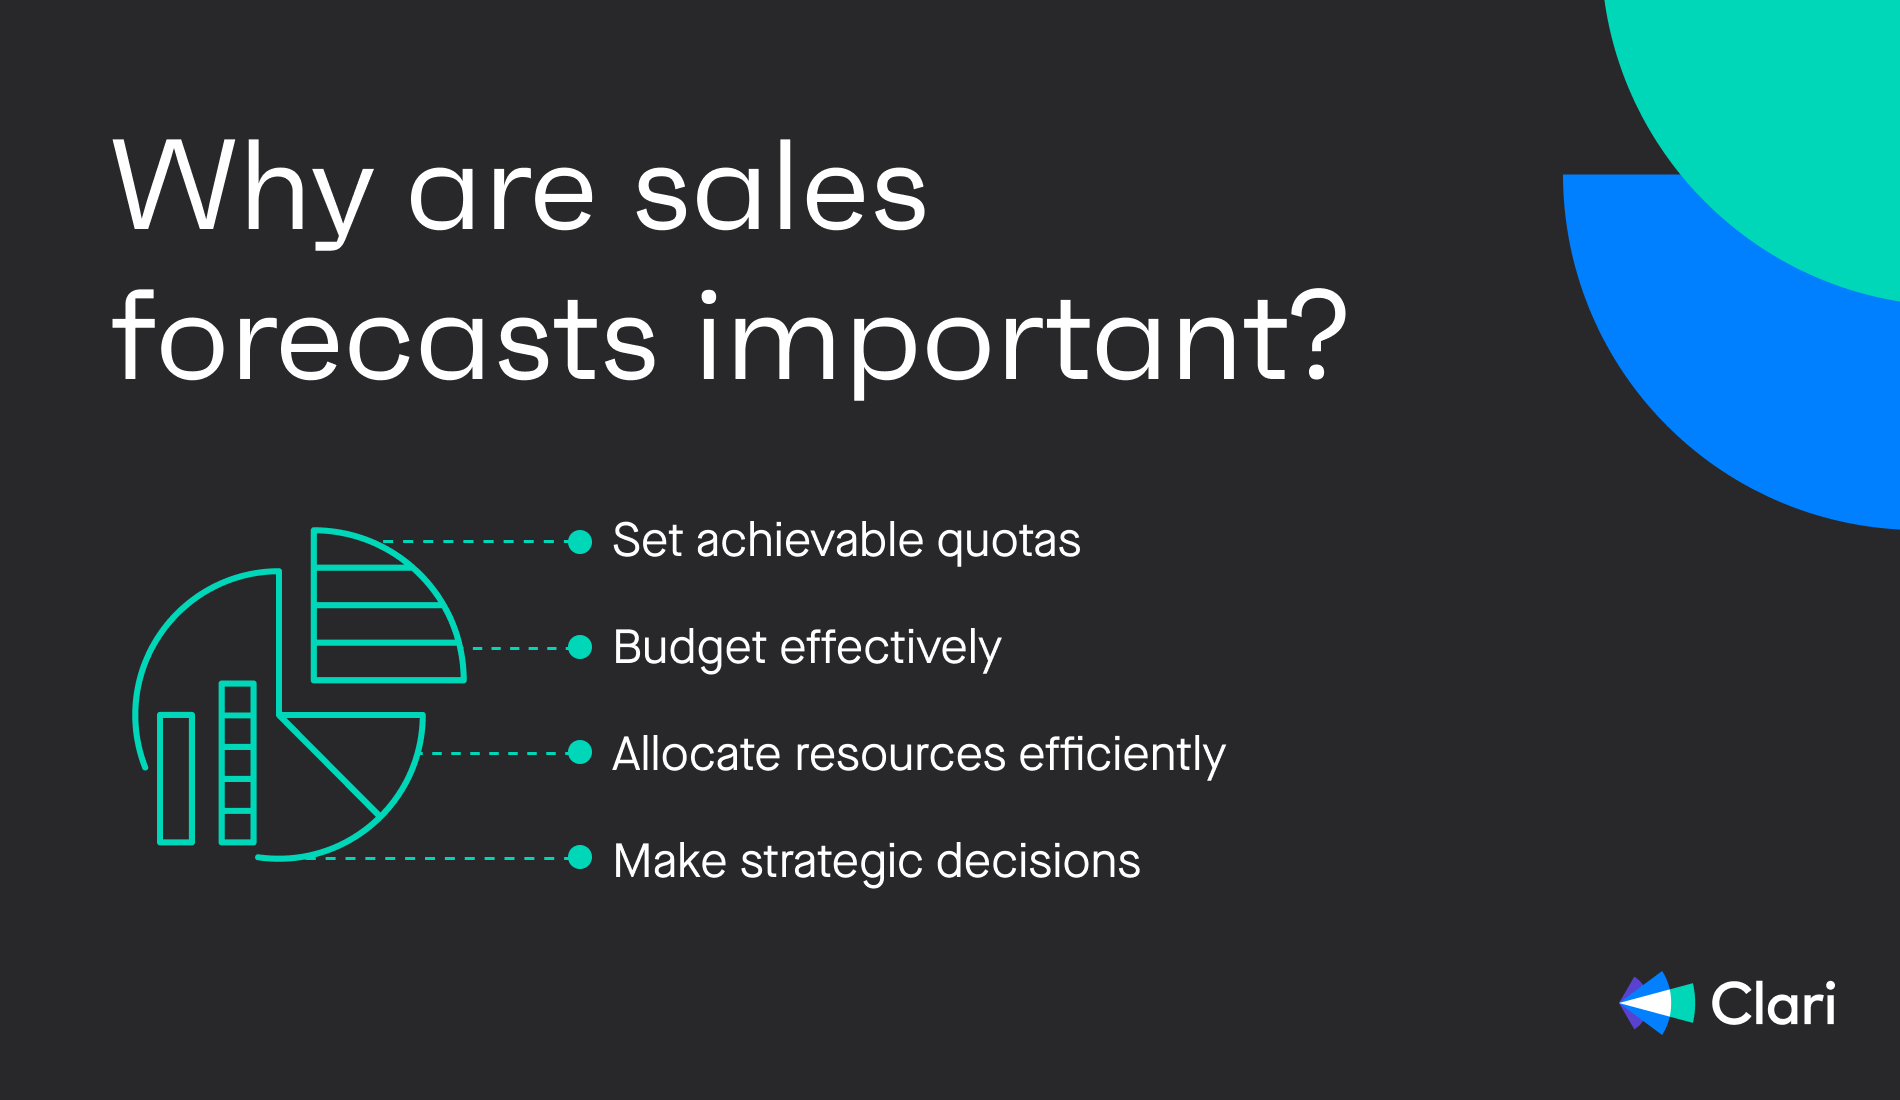 Why is sales forecasting important?